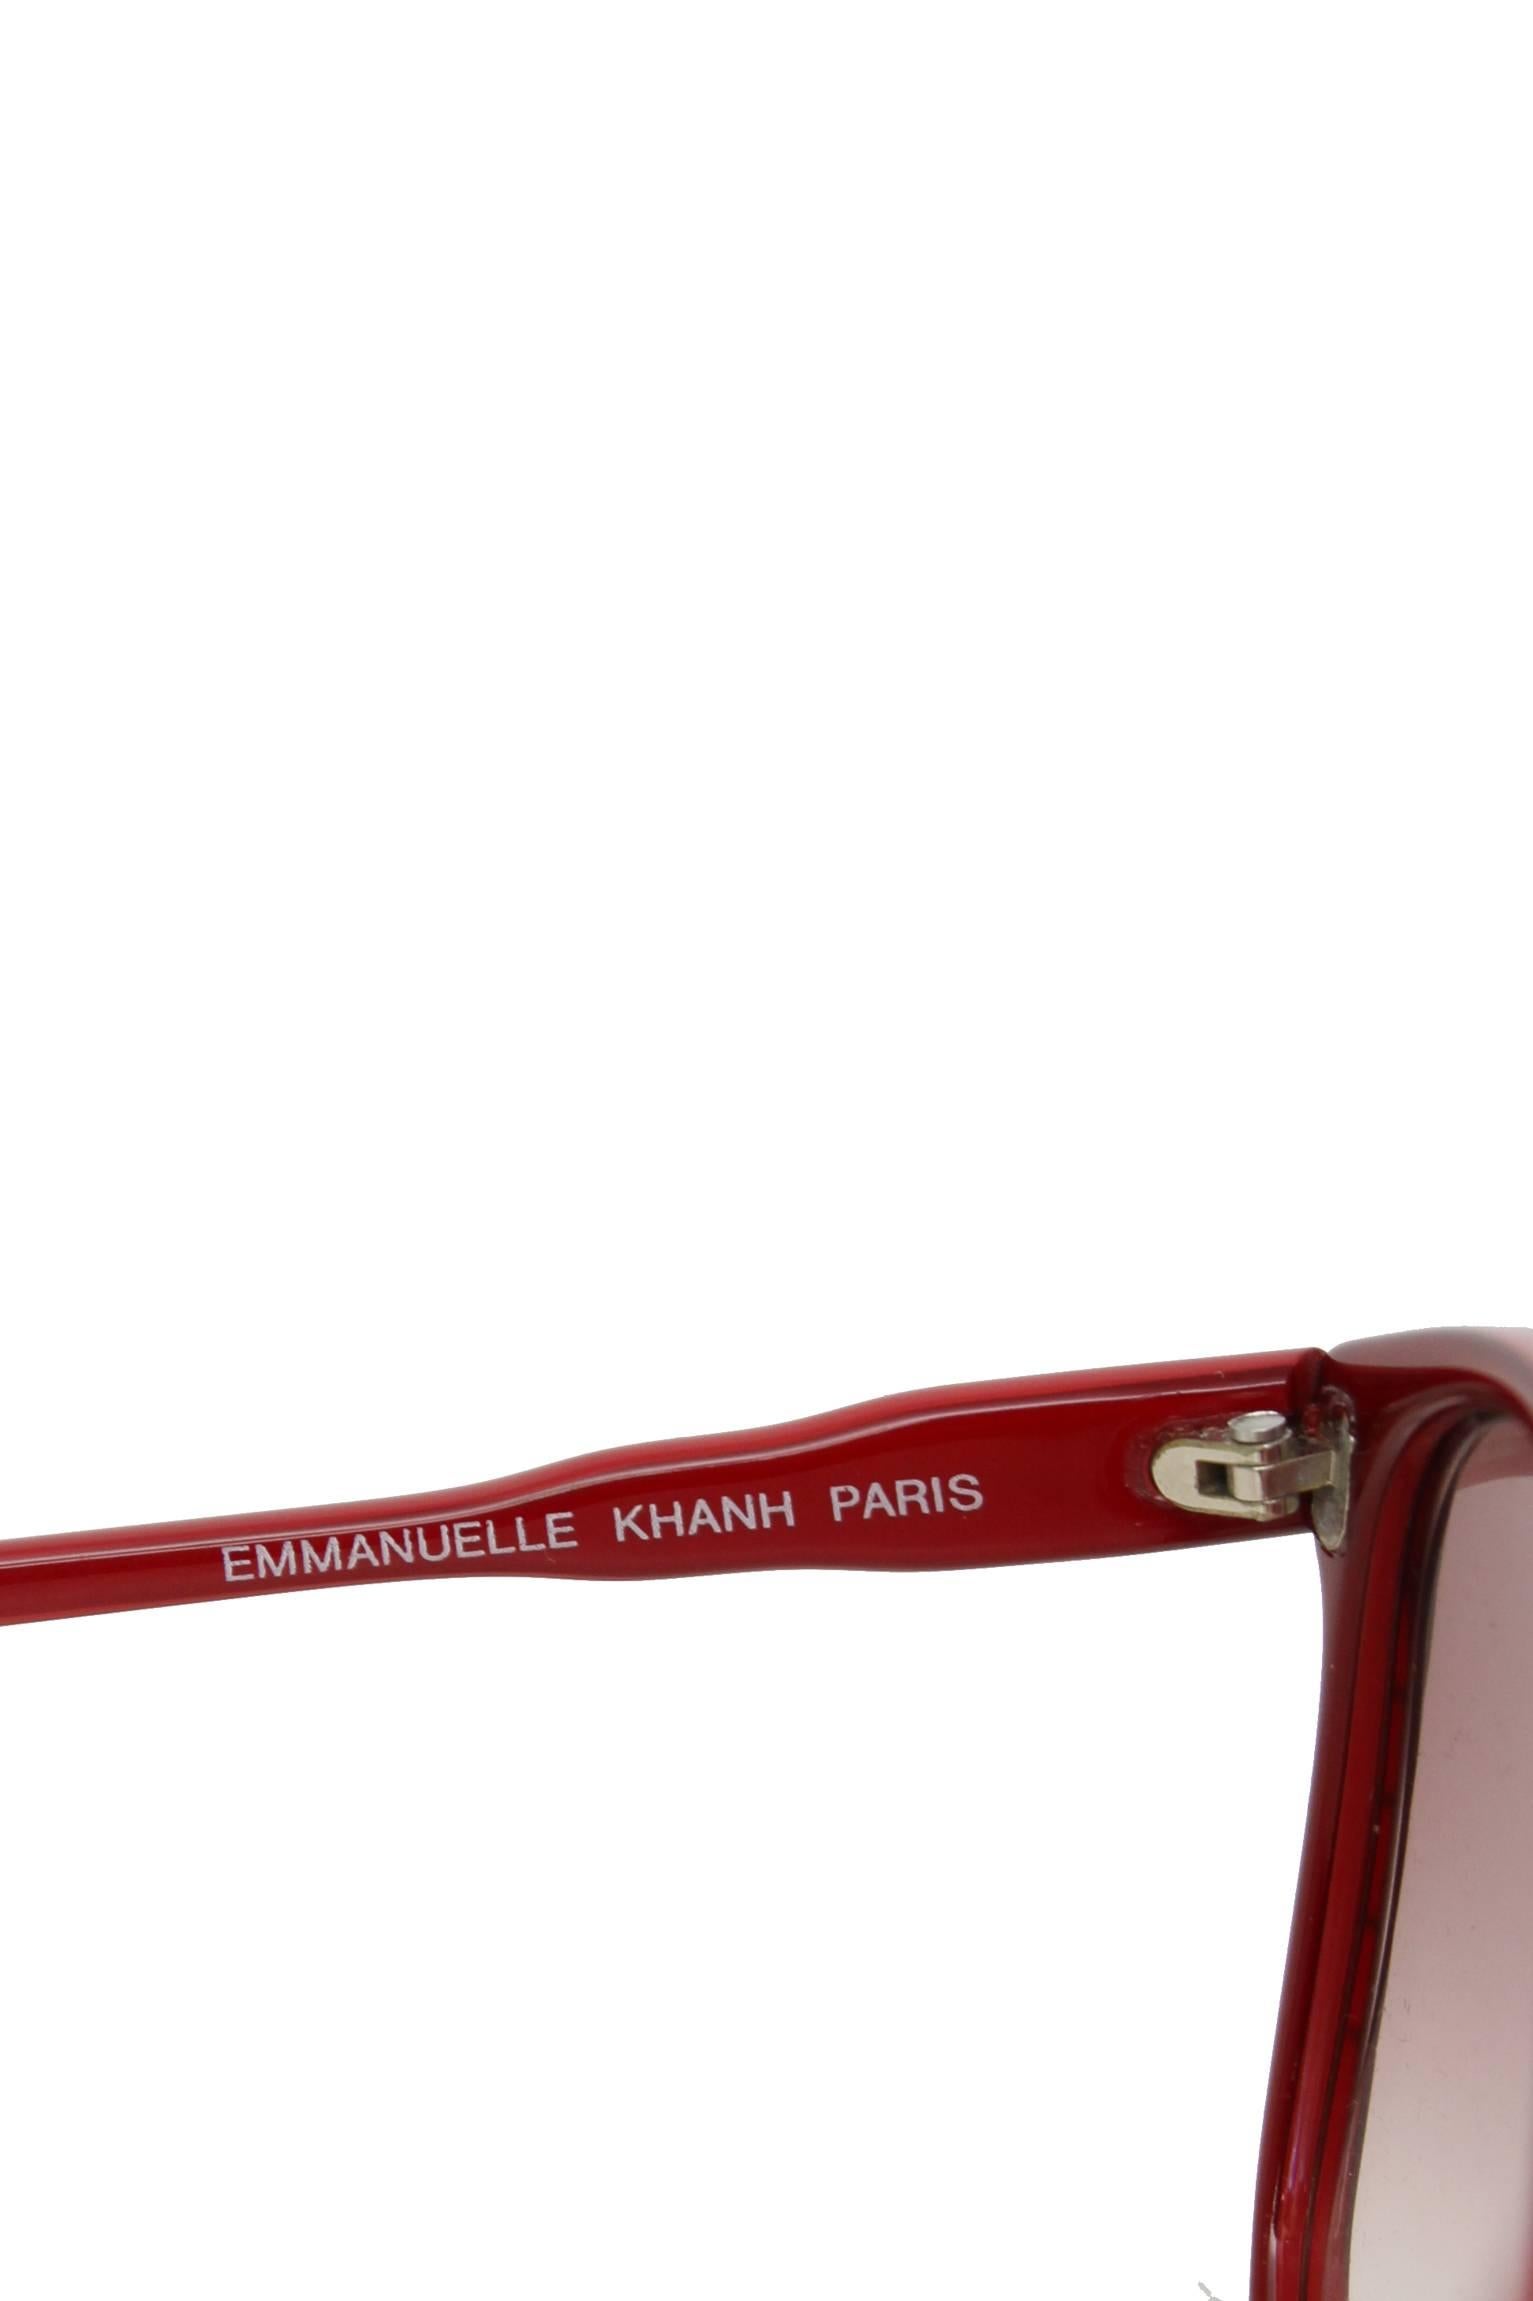 A pair of 1970s Emmanuelle Kahn red  frame sunglasses with a small gold colored logo situated at the top of each temple, and the red lenses are situated in a square frame with gold details in the outer top corners. 

The logo measures: 0.8x 0.8